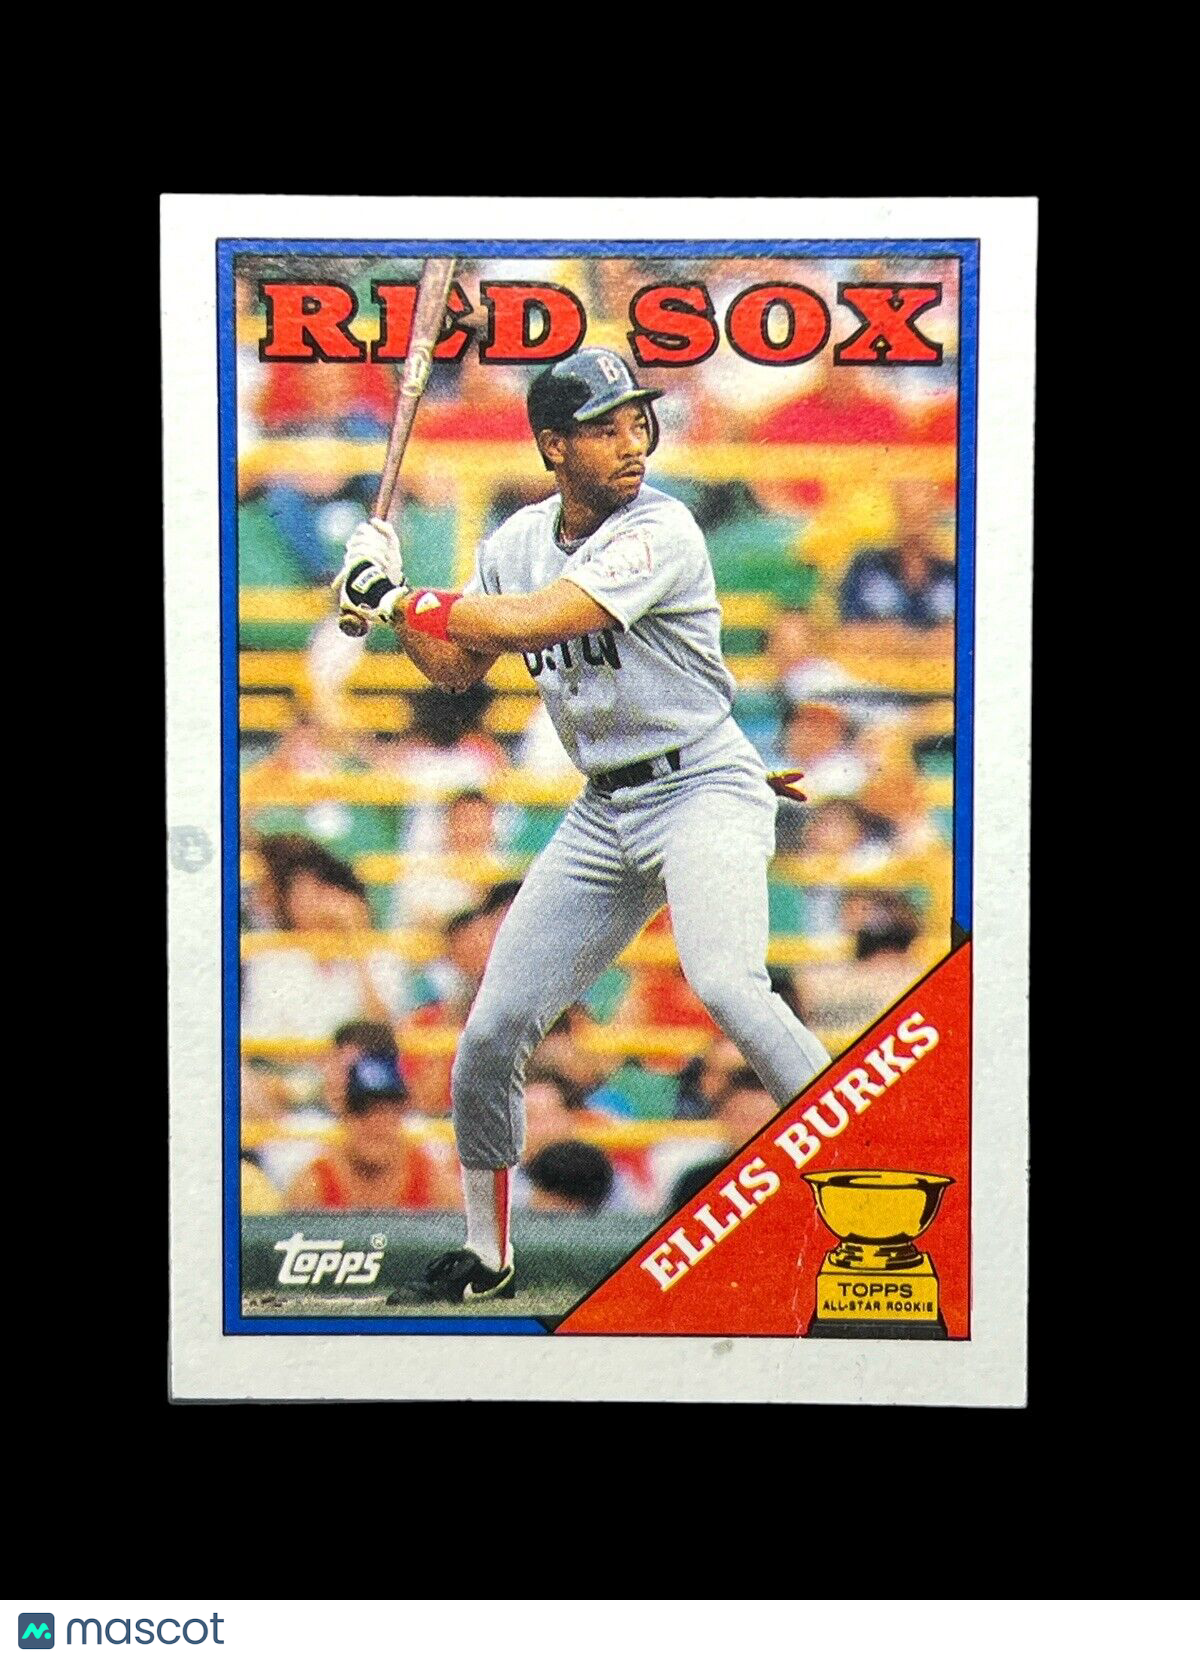 1988 Topps Ellis Burks #269 Rookie Cup Card Red Sox